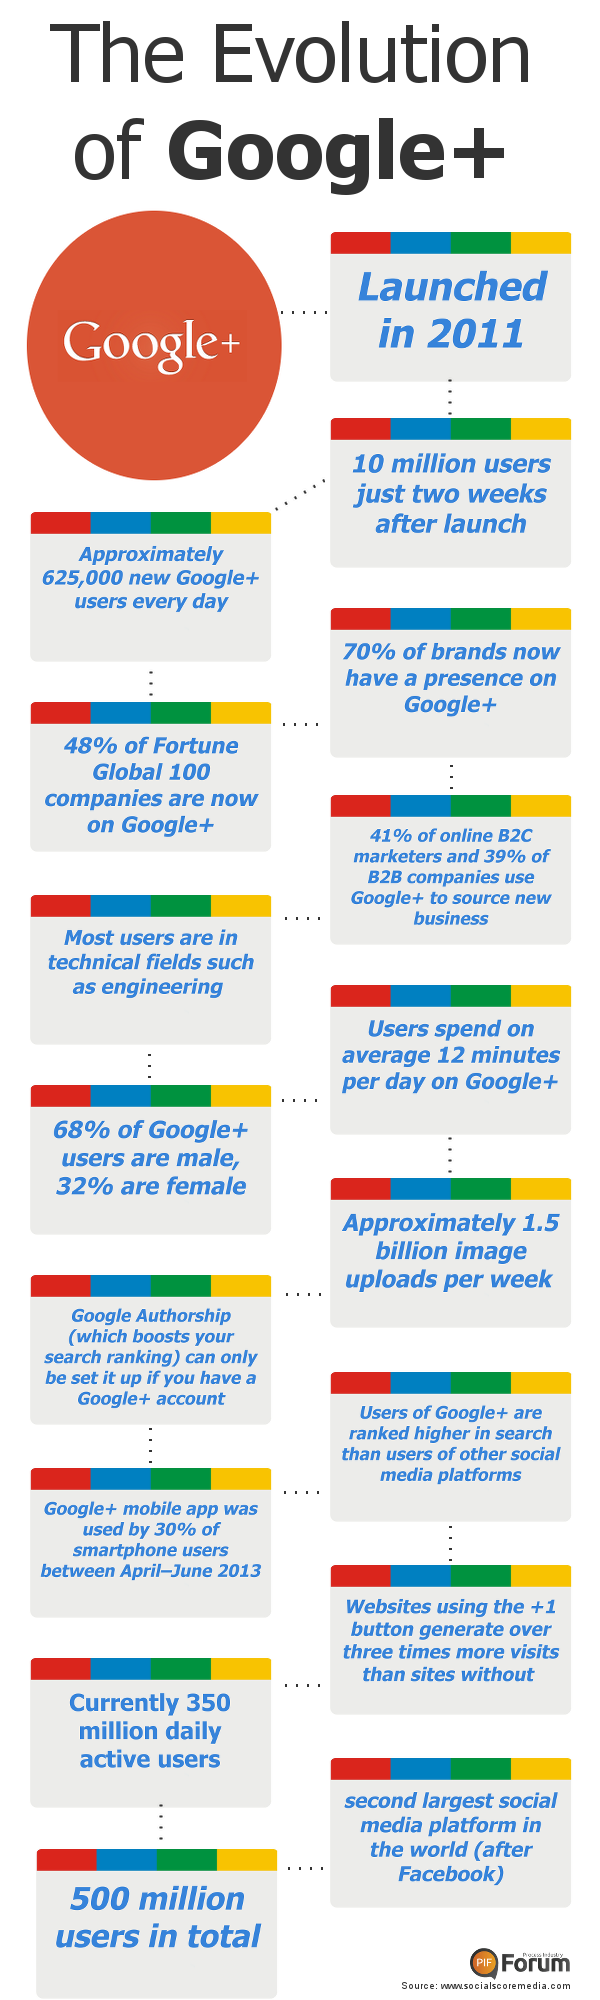 The facts & figures about Google+